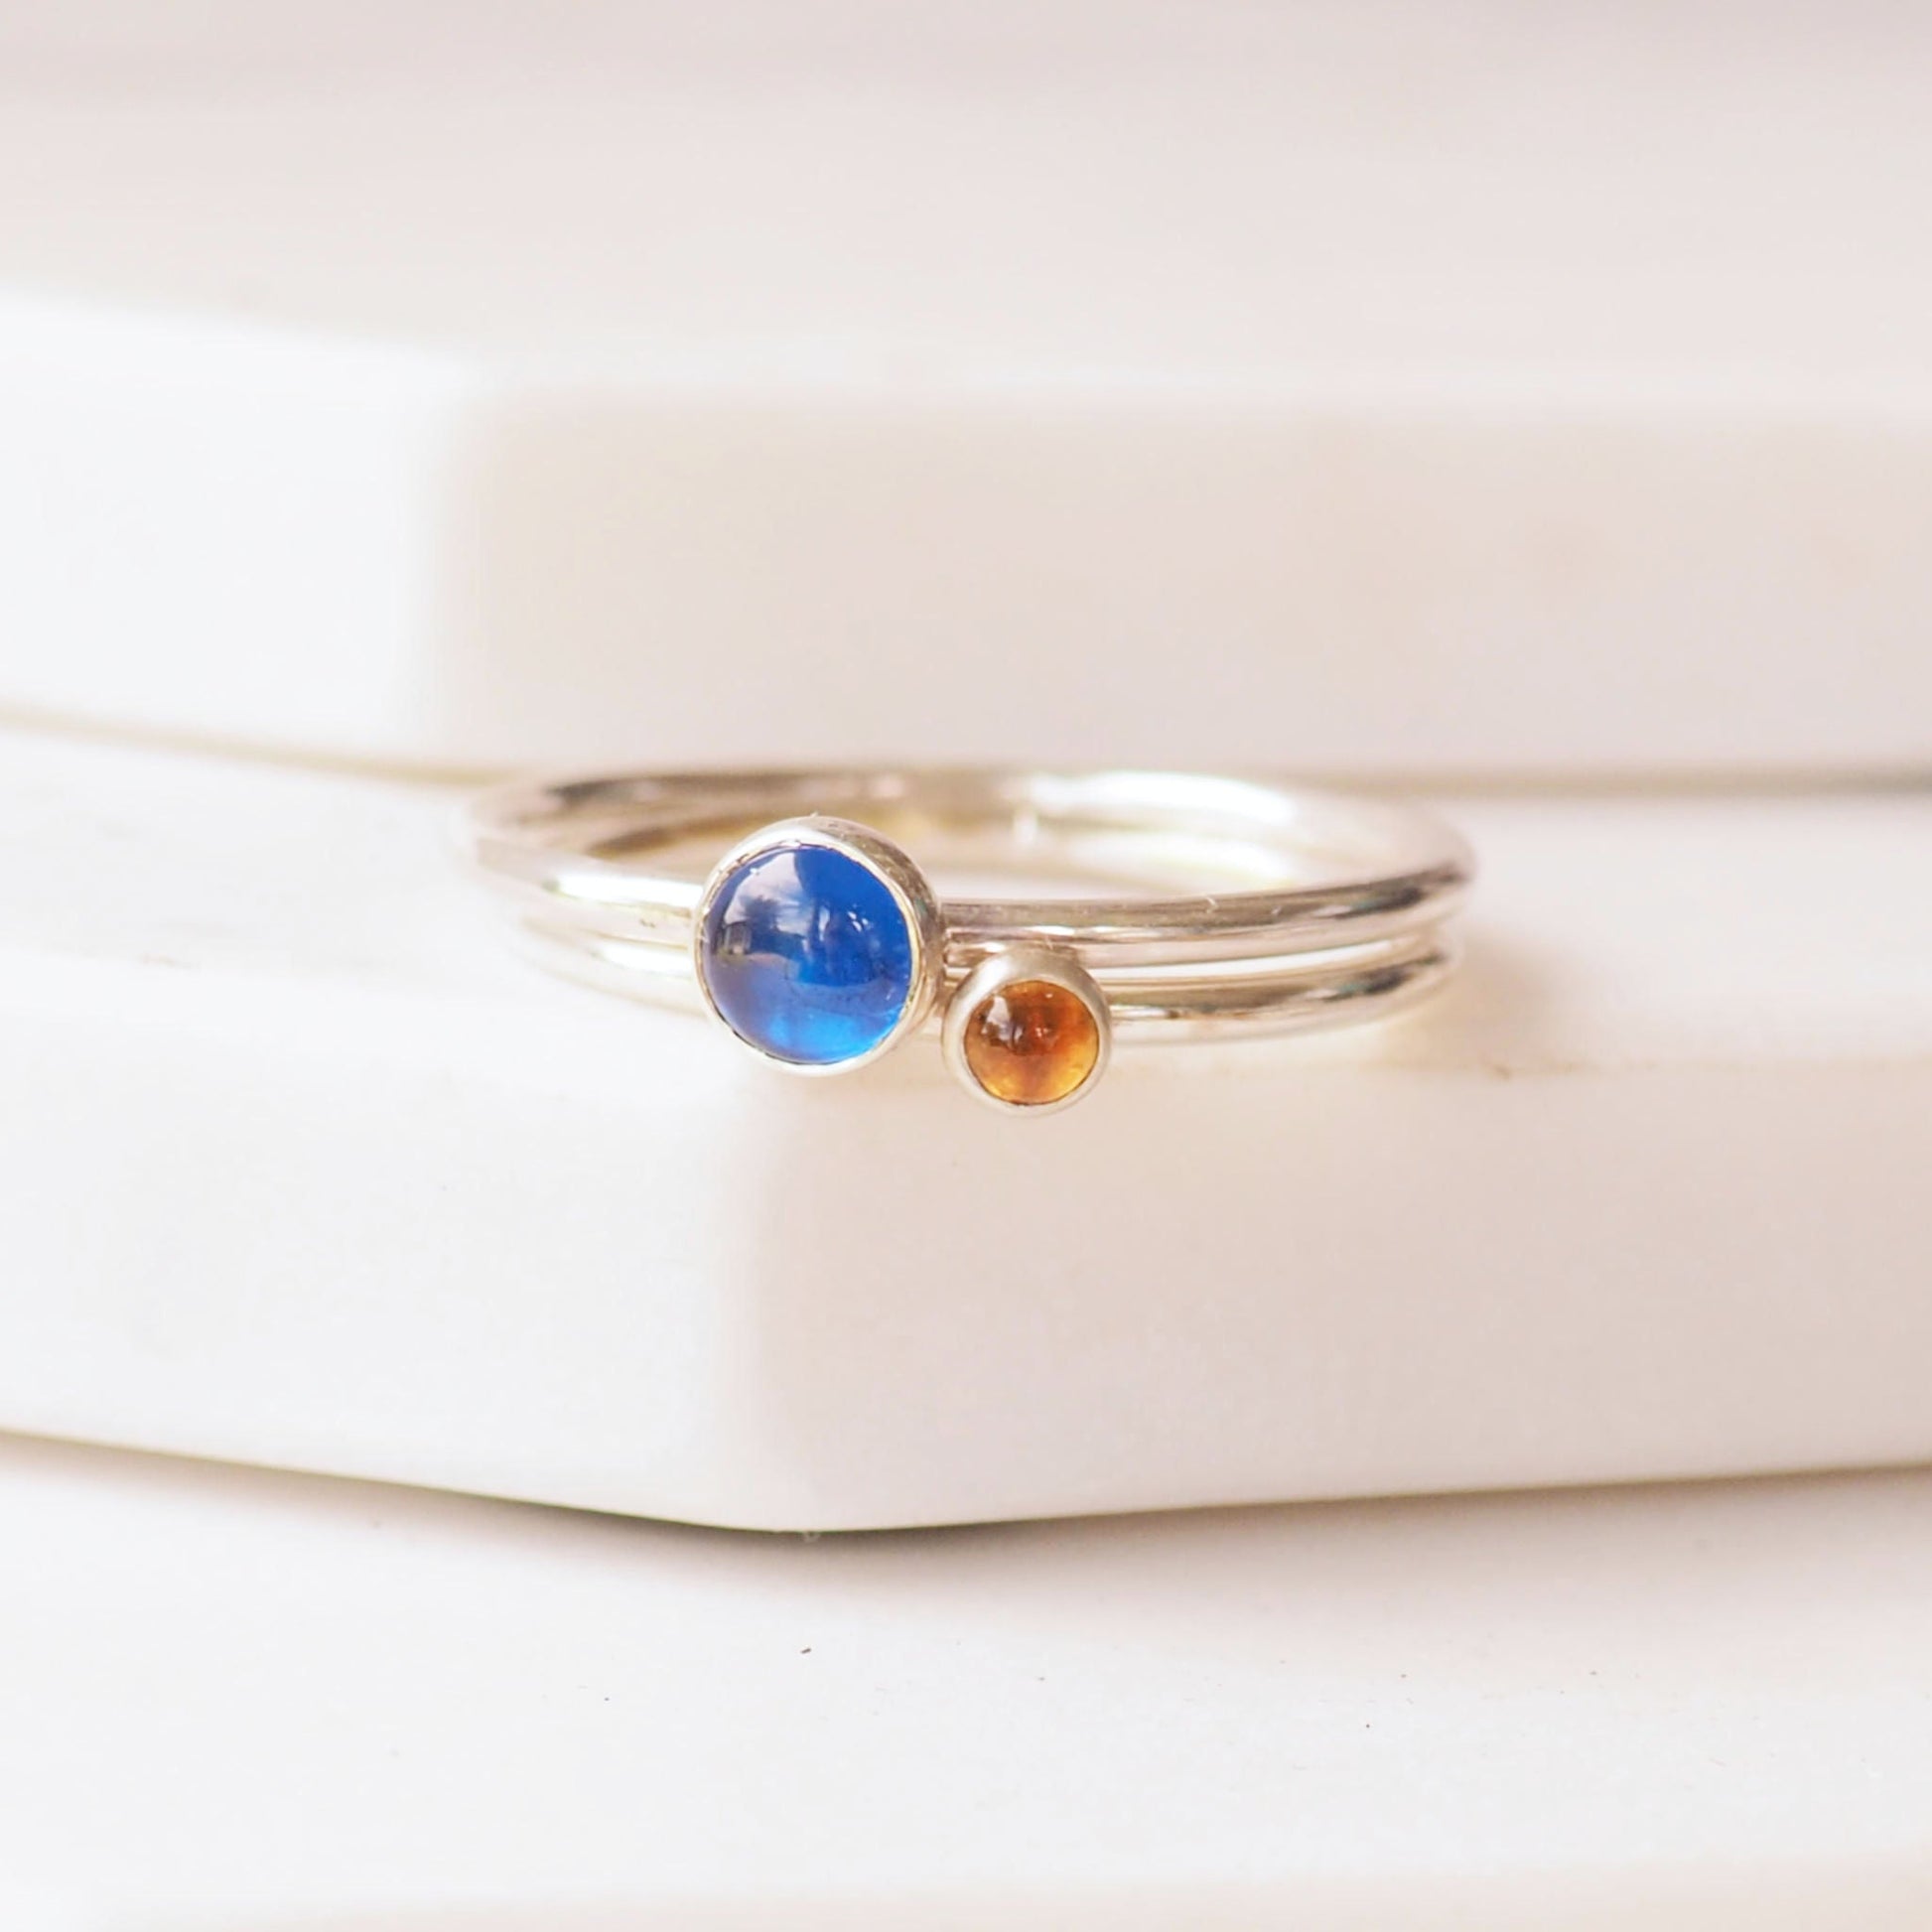 Two ring birthstone ring set with a Lab Sapphire and citrine - birthstones for September and November. Handmade with your choice of birthstones by maram jewellery in Edinburgh UK